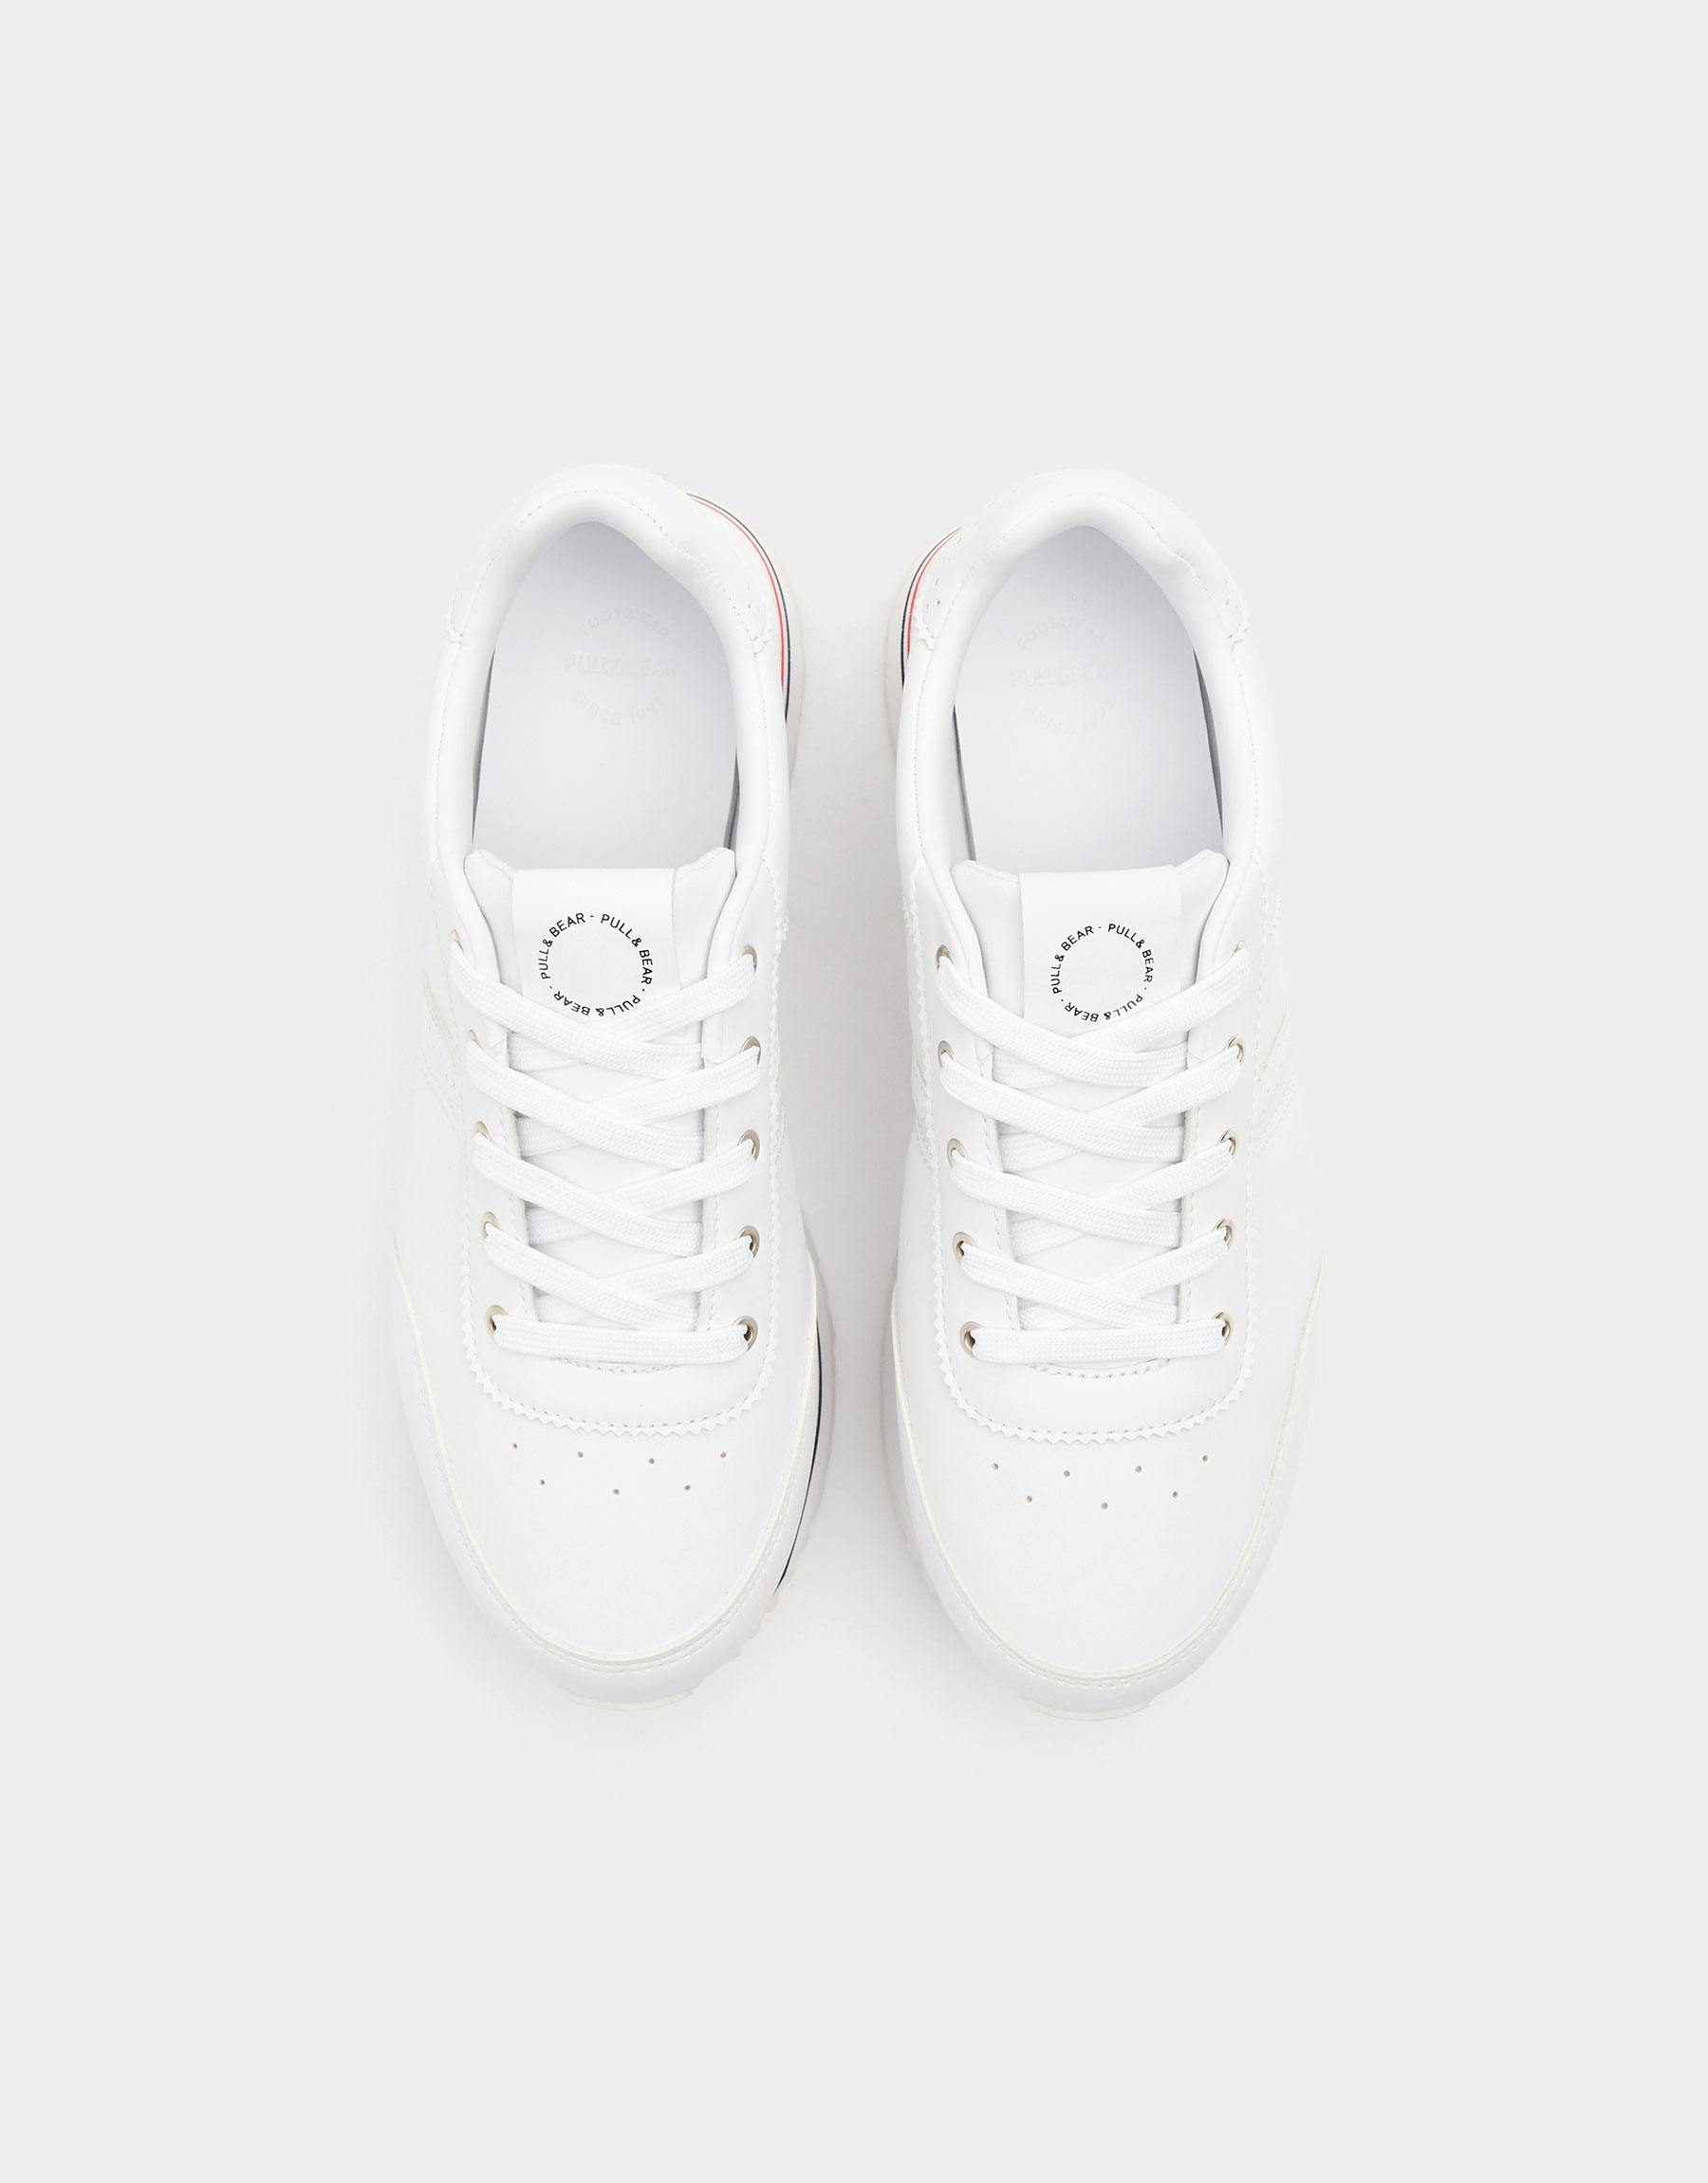 Pull & Bear White platform trainers at £29.99 | love the brands